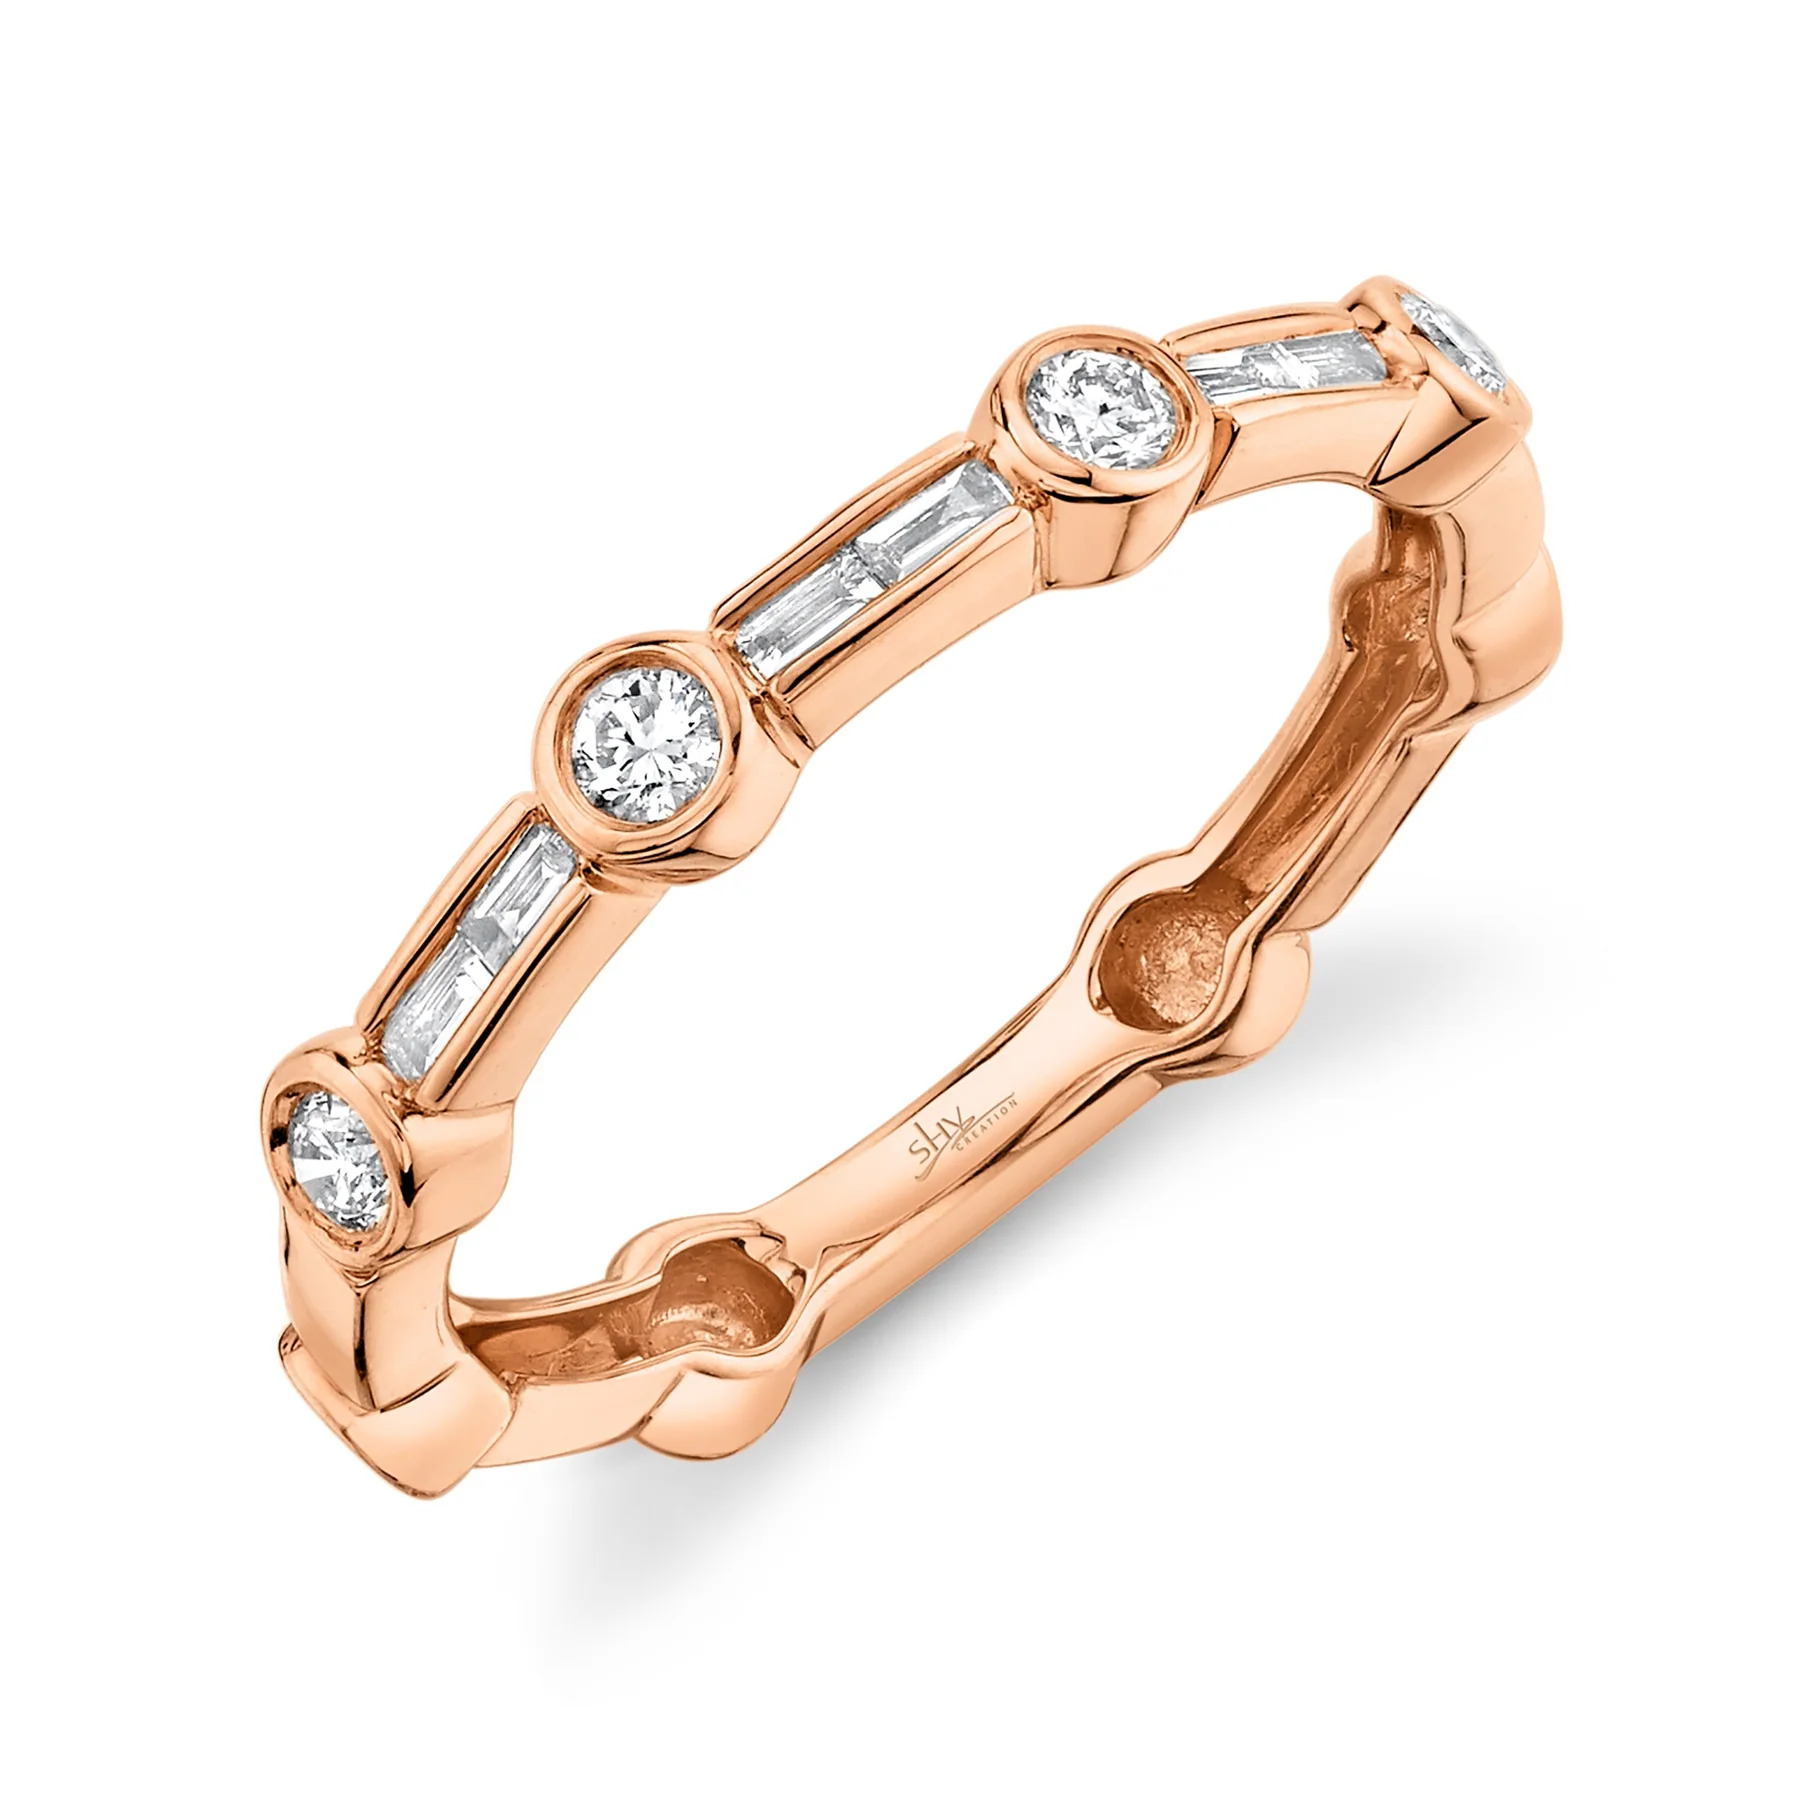 One rose gold ring slandted position toward the camera. The ring features with an alternating pattern of round and baguette diamonds.